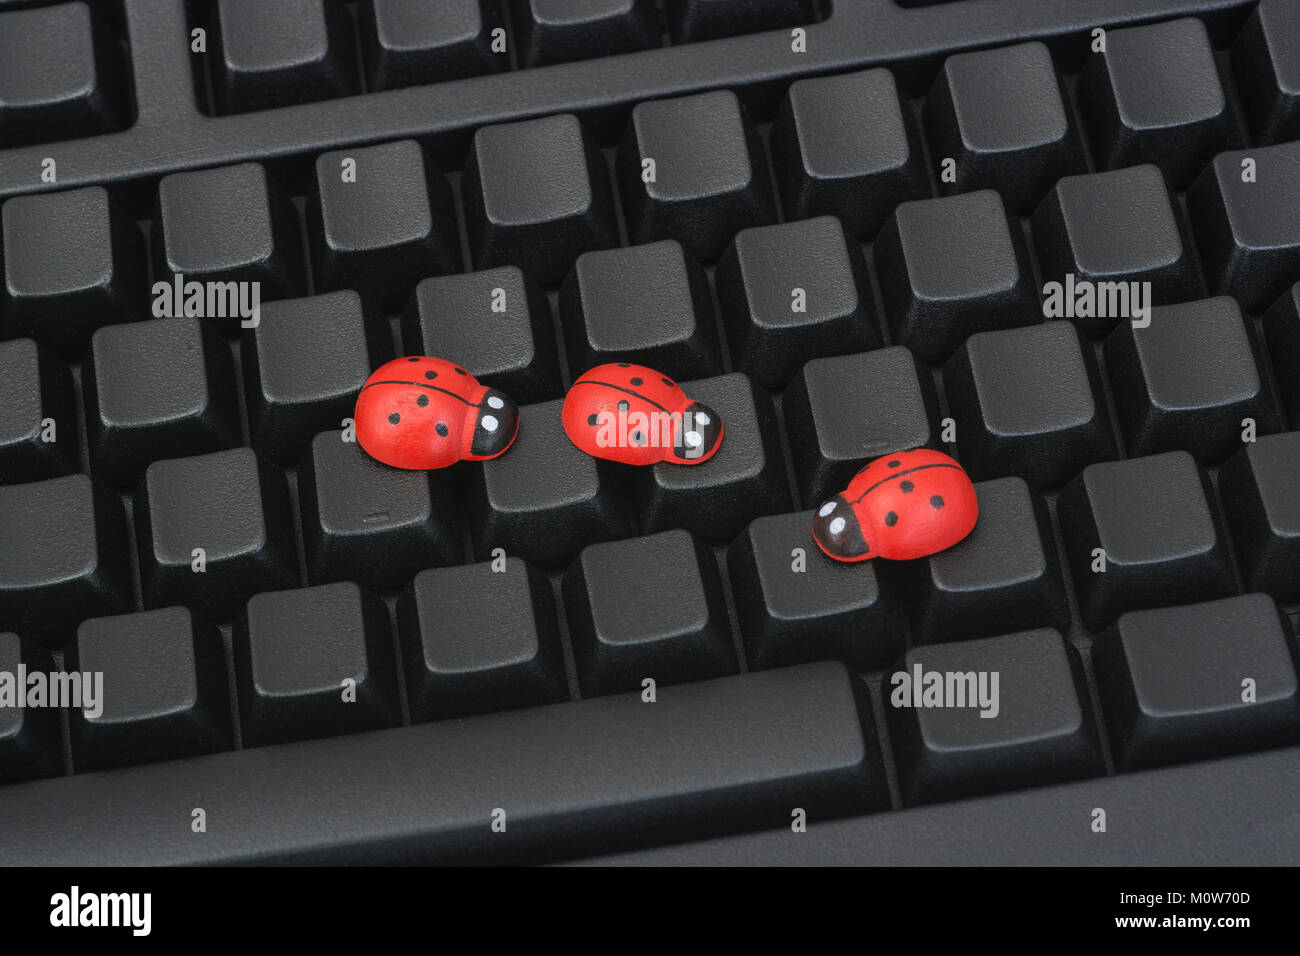 Small toy ladybird - as visual metaphor for concept of computer bugs, software bugs, hardware bugs, computer viruses. Stock Photo